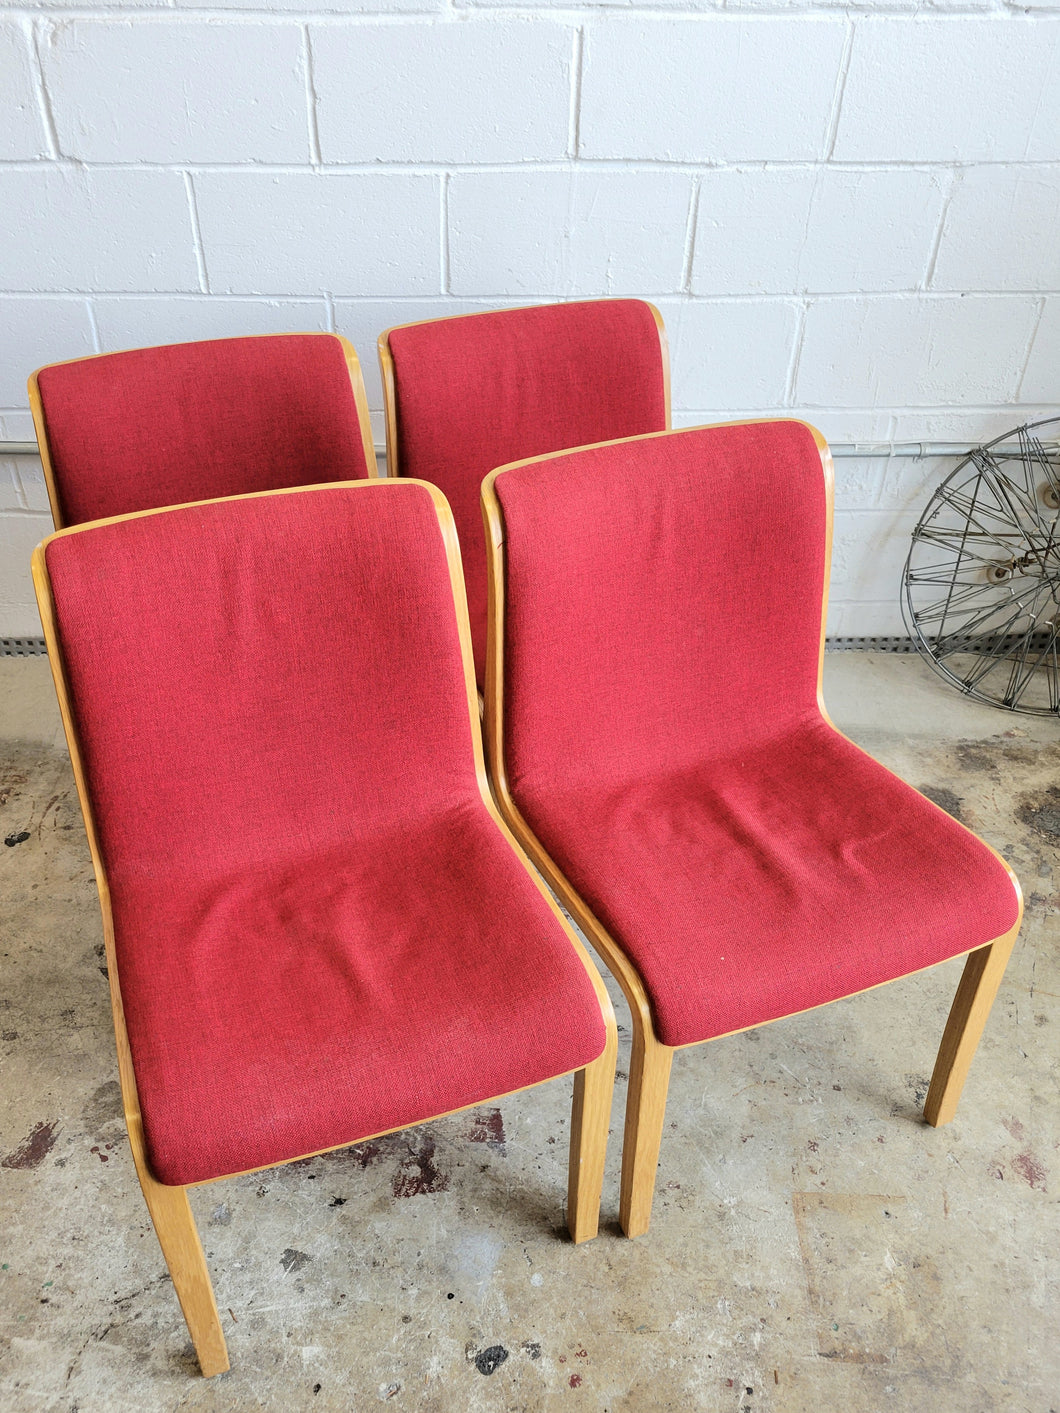 Set of Four Vintage Bill Stephens for Knool Sude Chairs